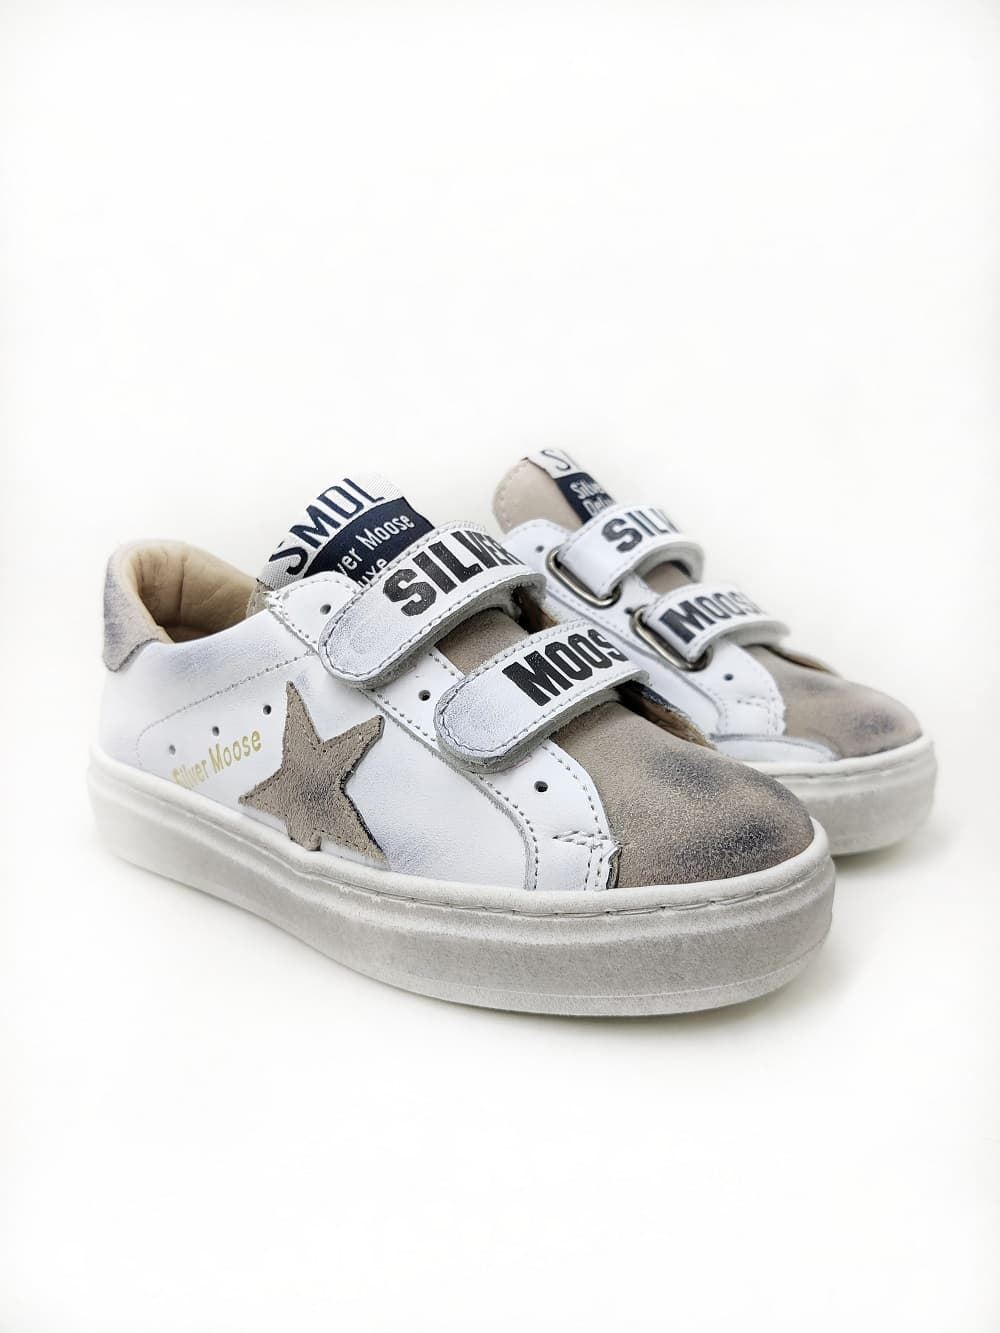 Golden Star Sneakers in White Taupe leather with Velcro - Image 2